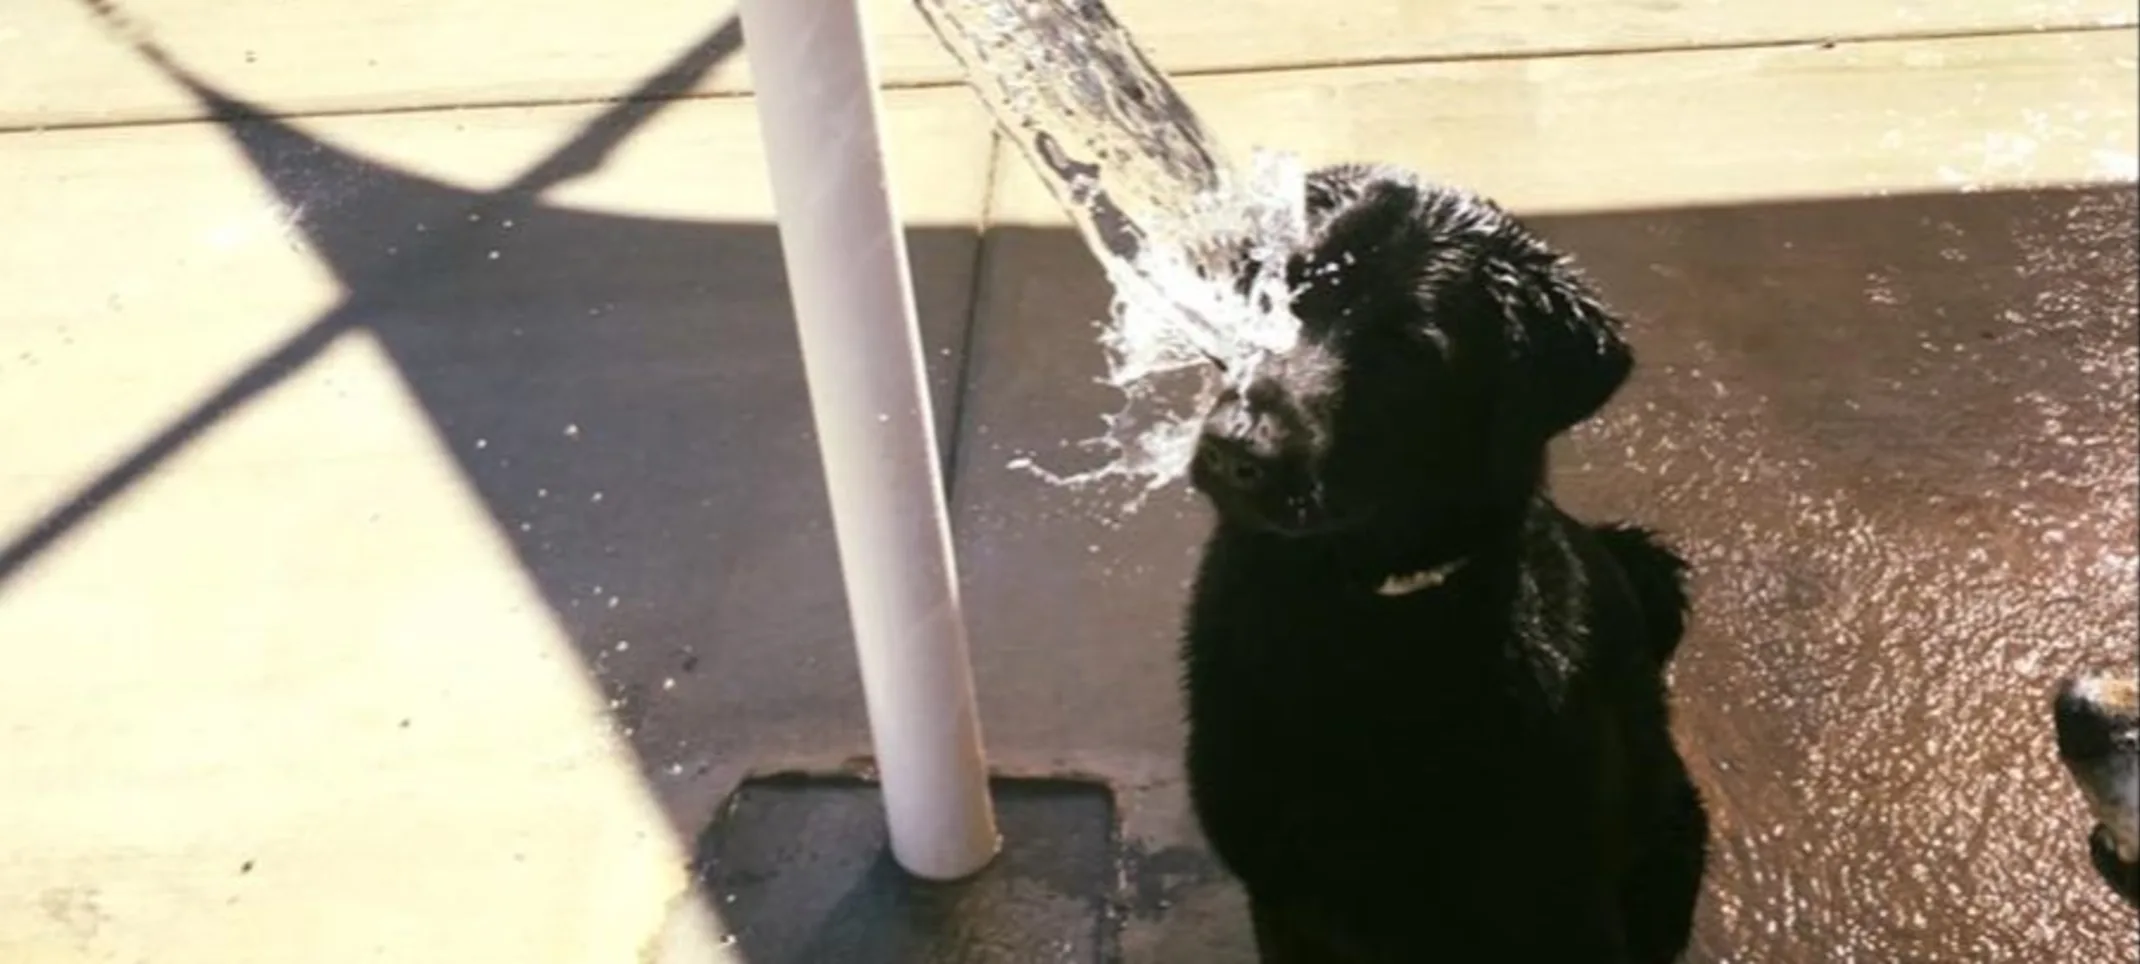 Black Labrador Playing Outside where there is a bucket of water and they're enjoying getting splashed.